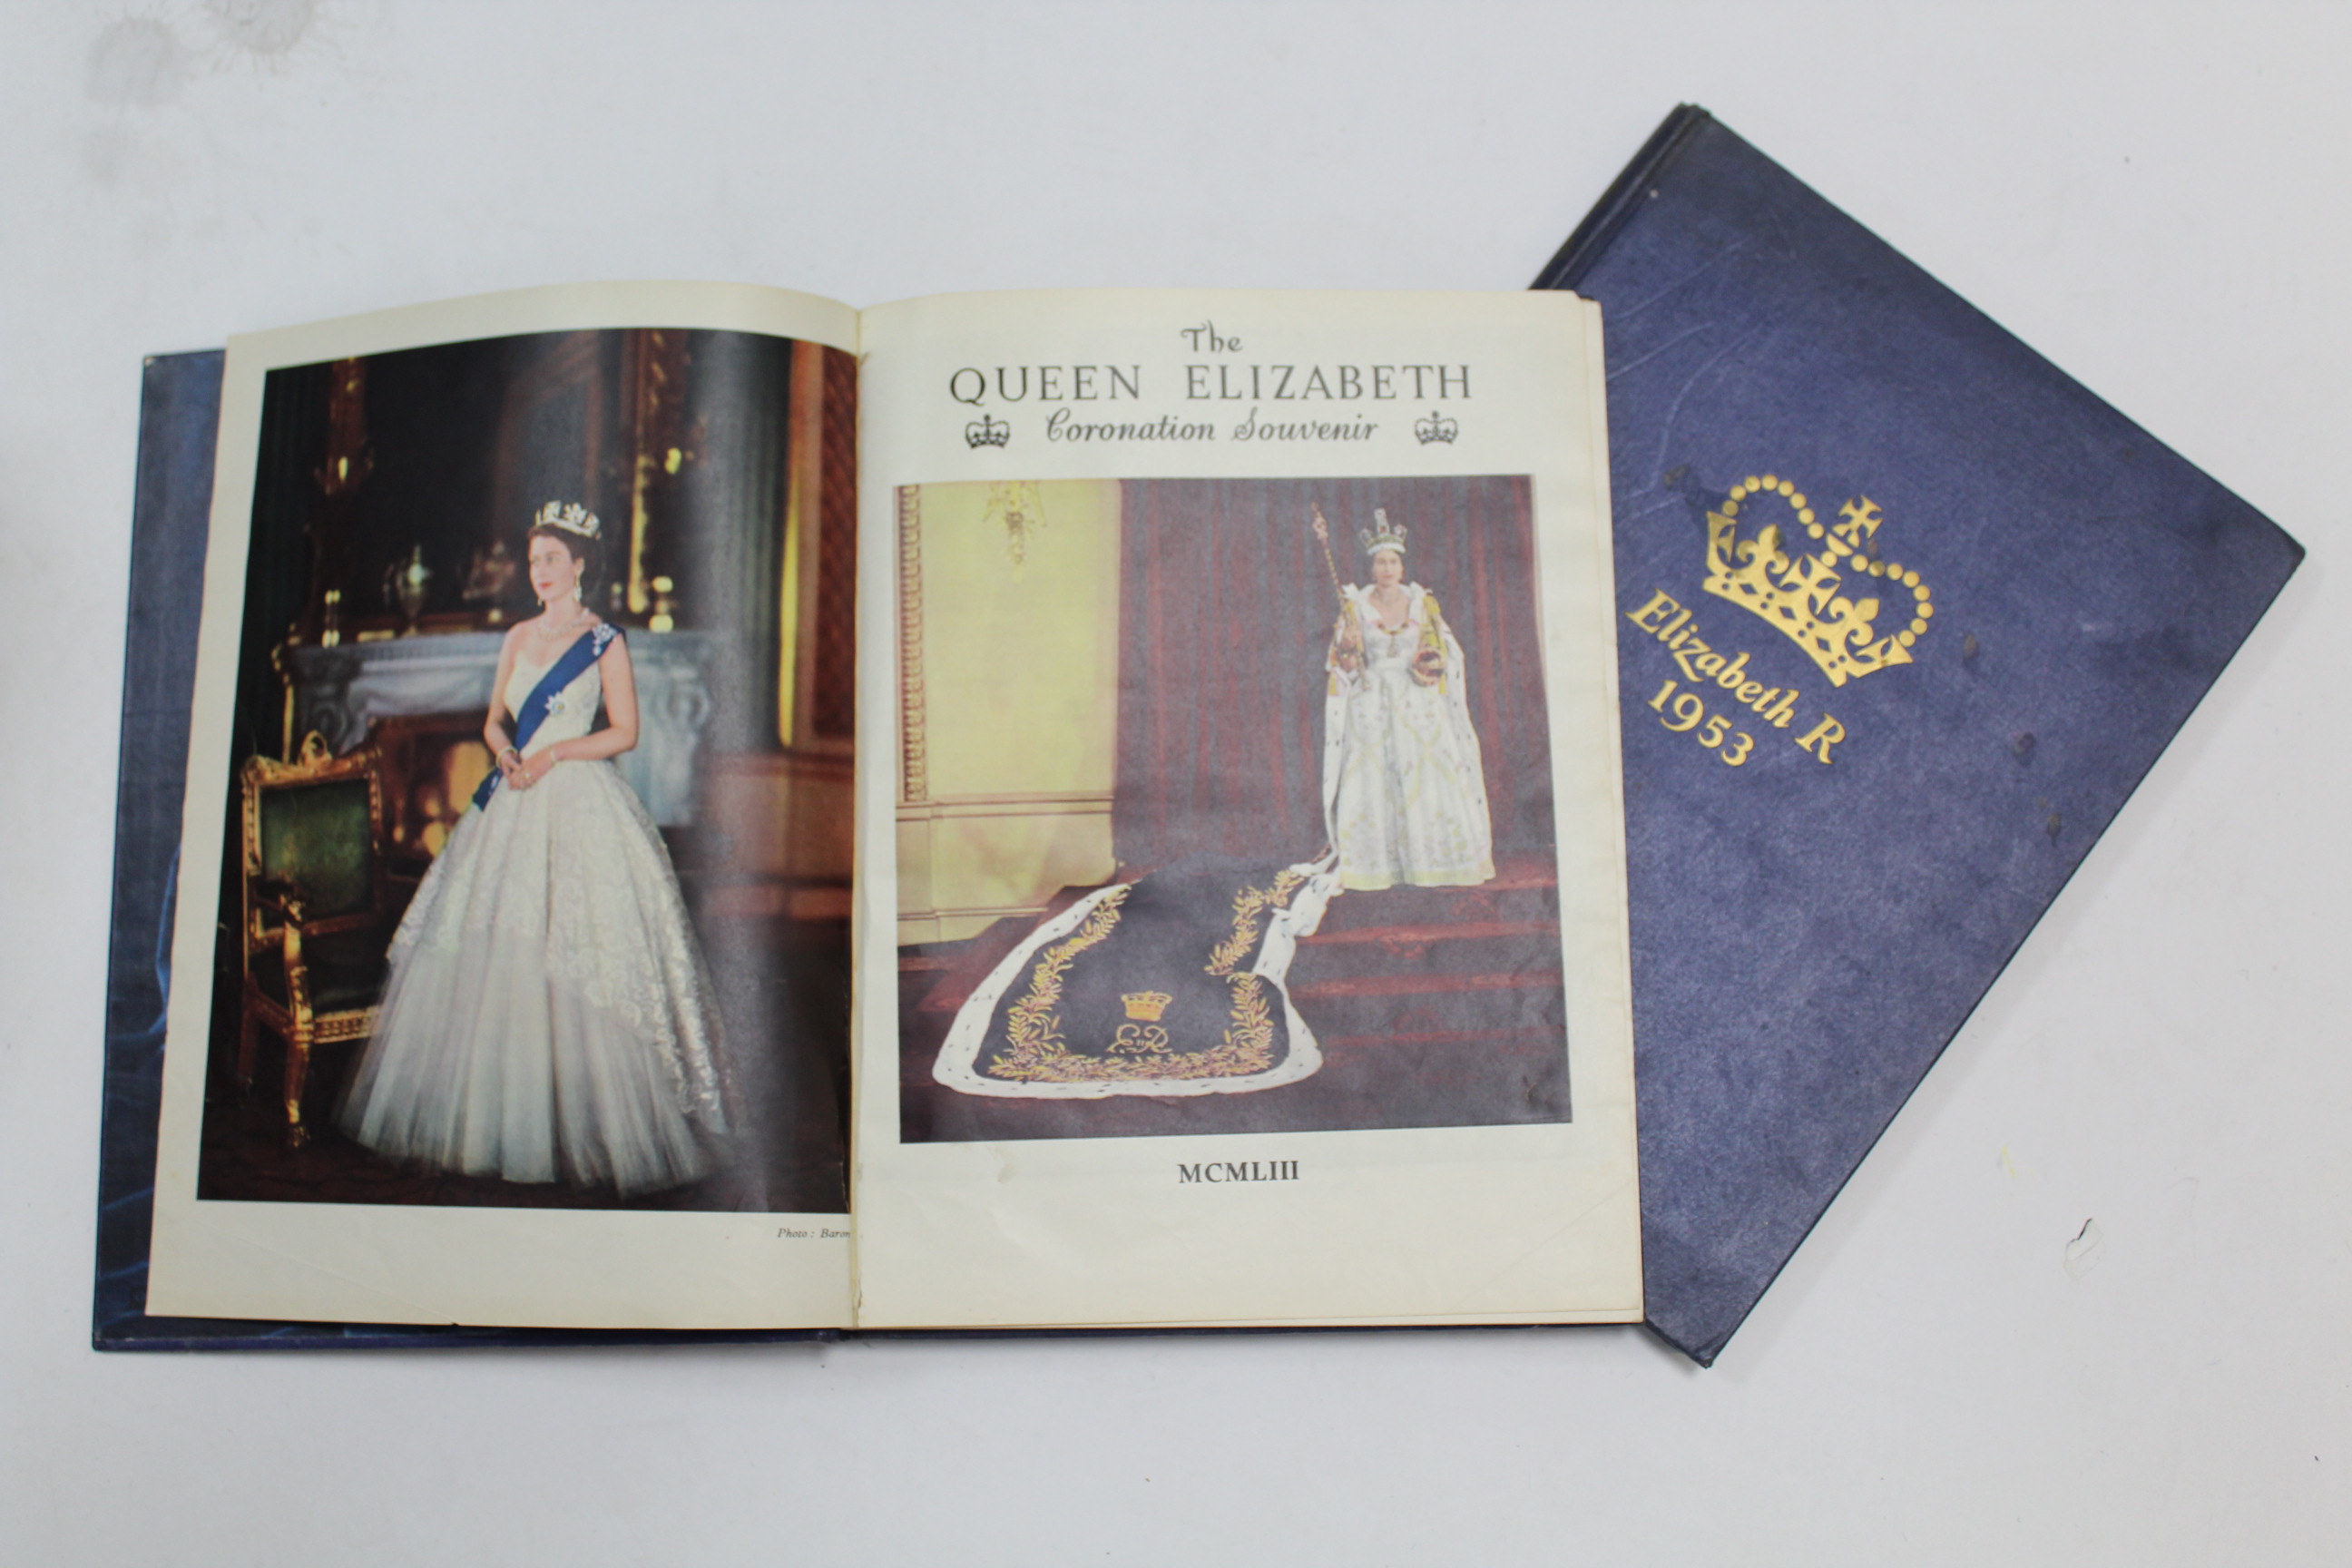 One volume “Marriage of Her Royal Highness the Princess Elizabeth and Lieutenant Philip - Image 3 of 4